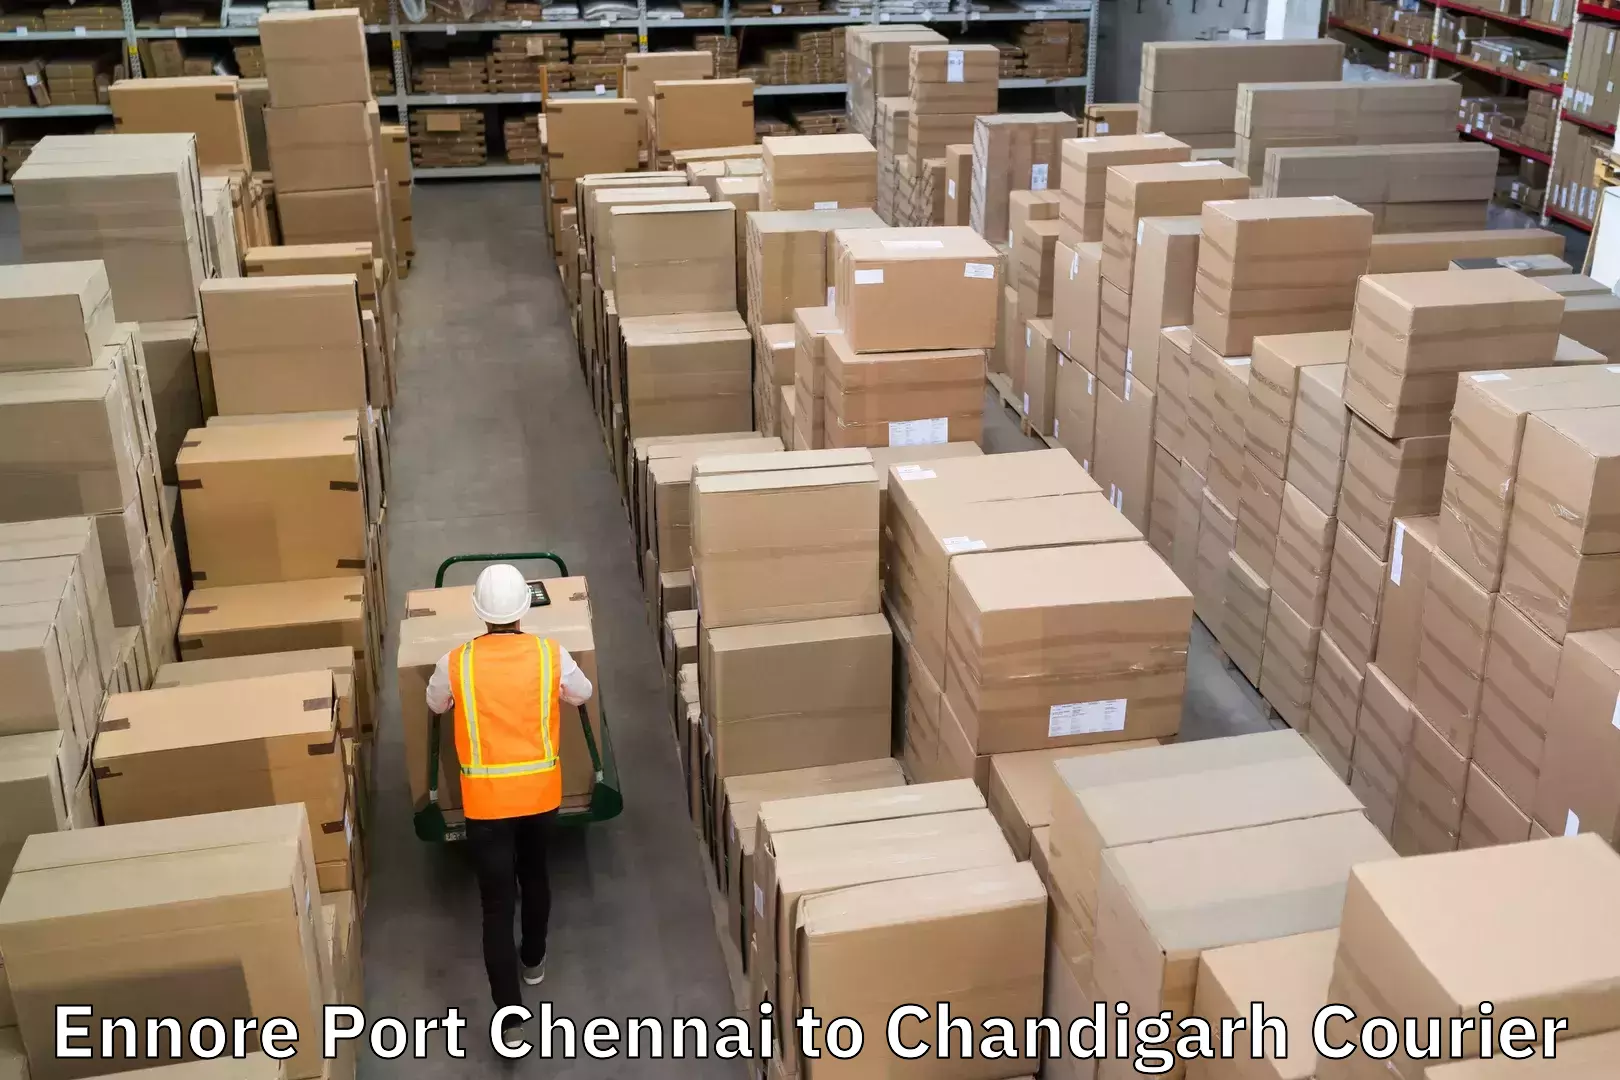 Special handling courier Ennore Port Chennai to Chandigarh